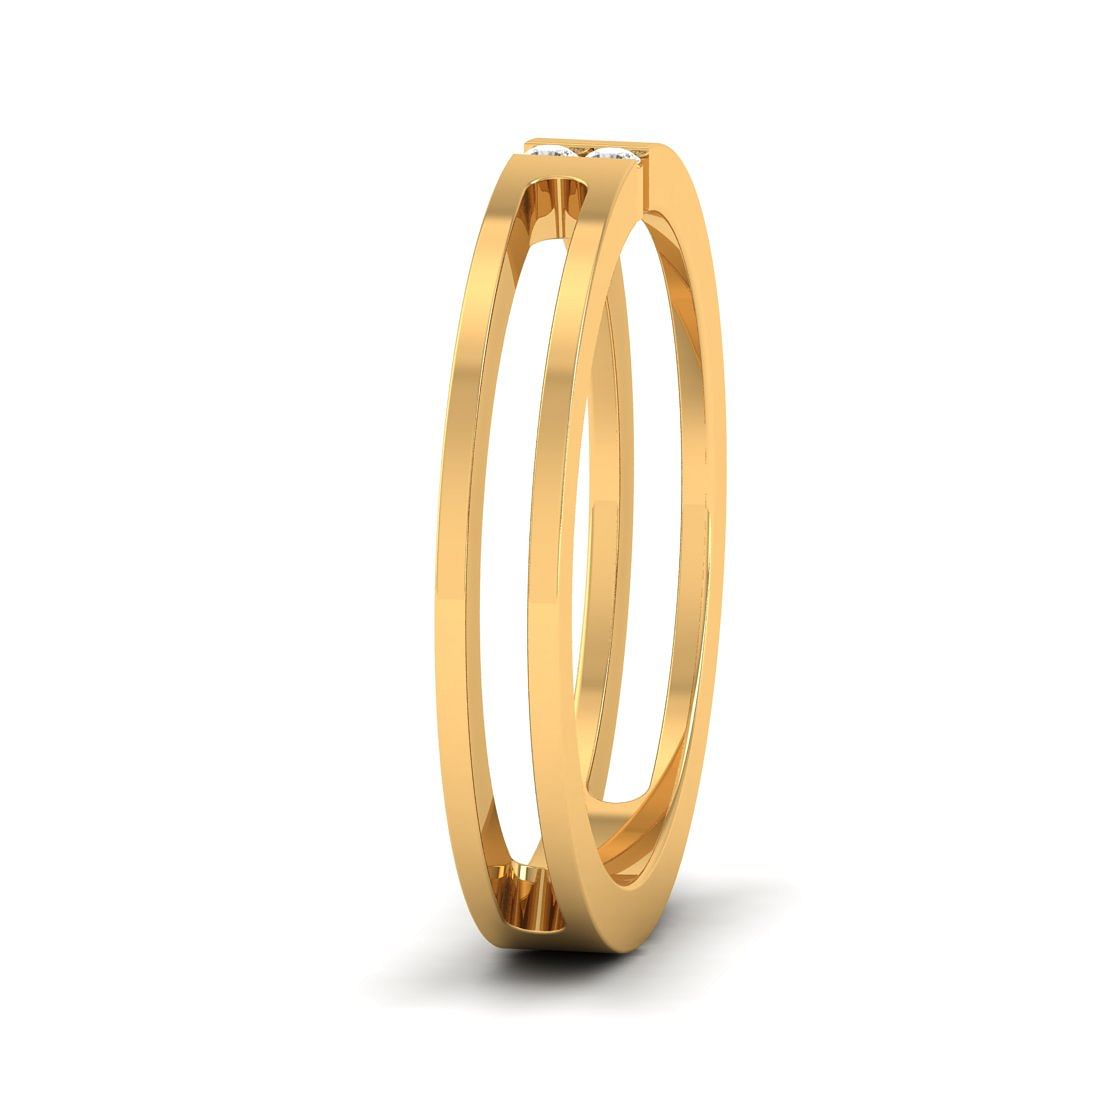 Double Layer Yellow Gold Diamond Ring For Women